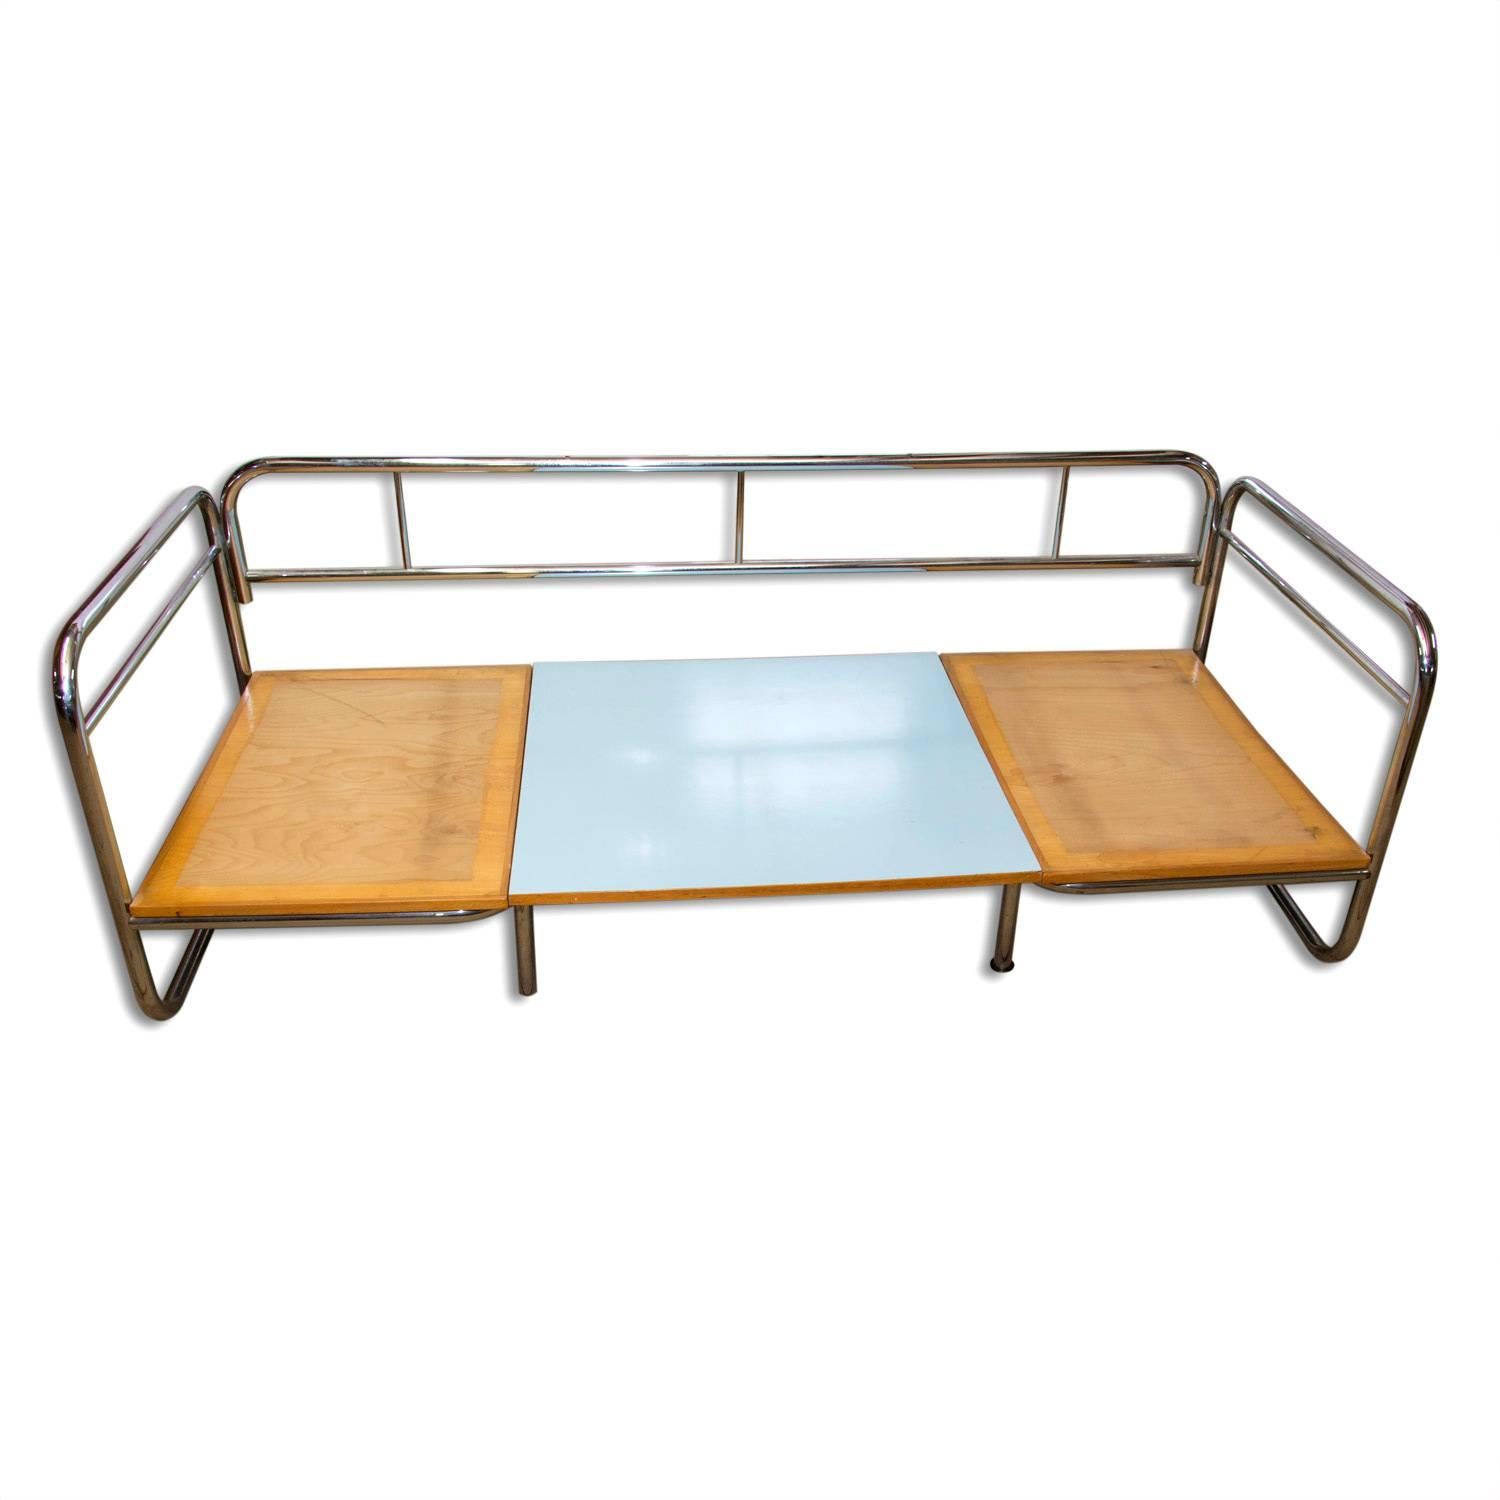 Mid-20th Century Exceptional Functionalist Multipurpose Seating Set-Sofa Bed, 1950s